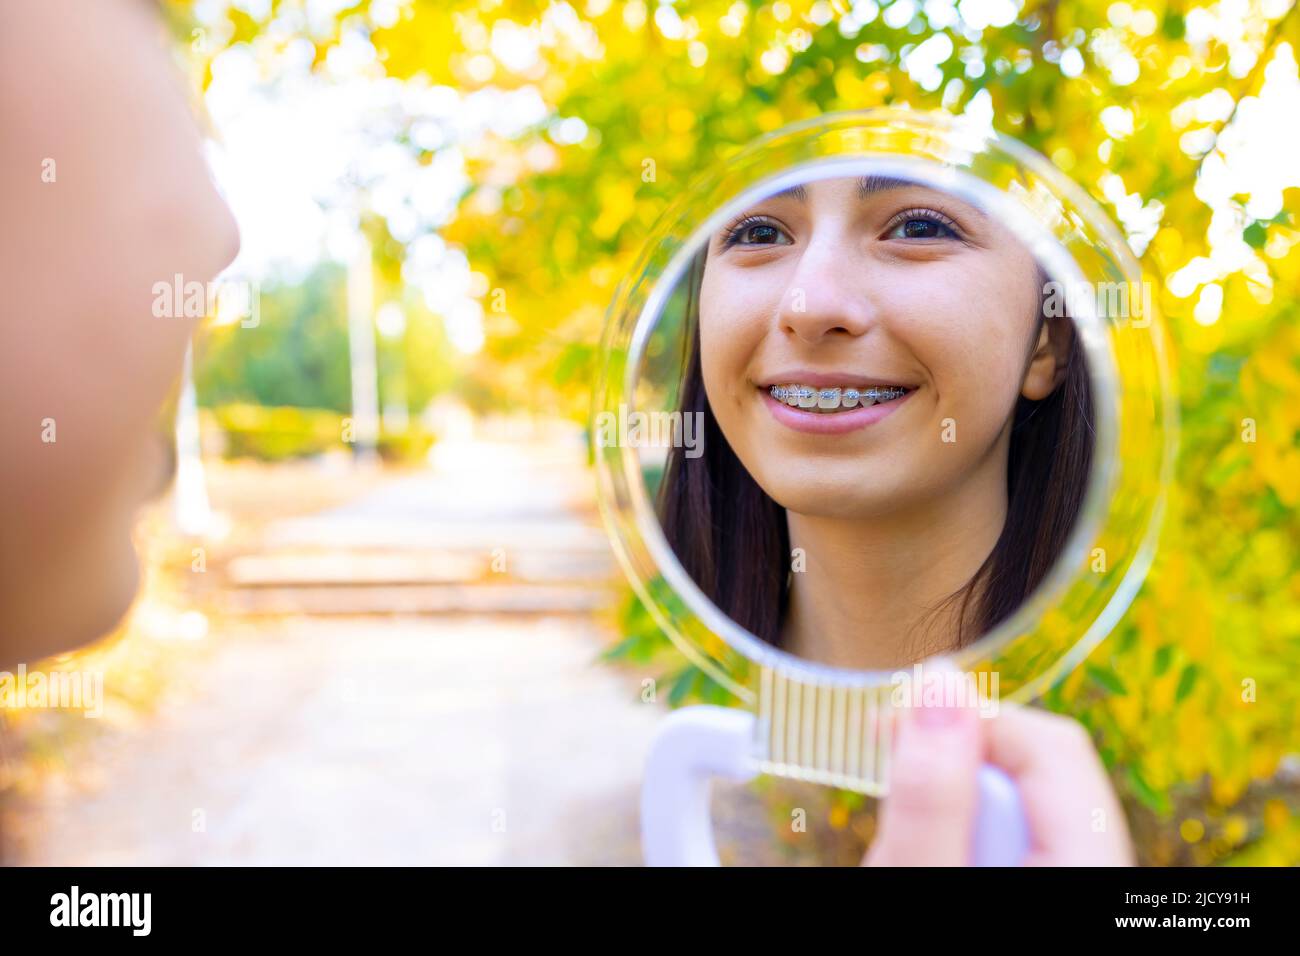 Caucasian girl looking in mirror outside Stock Photo